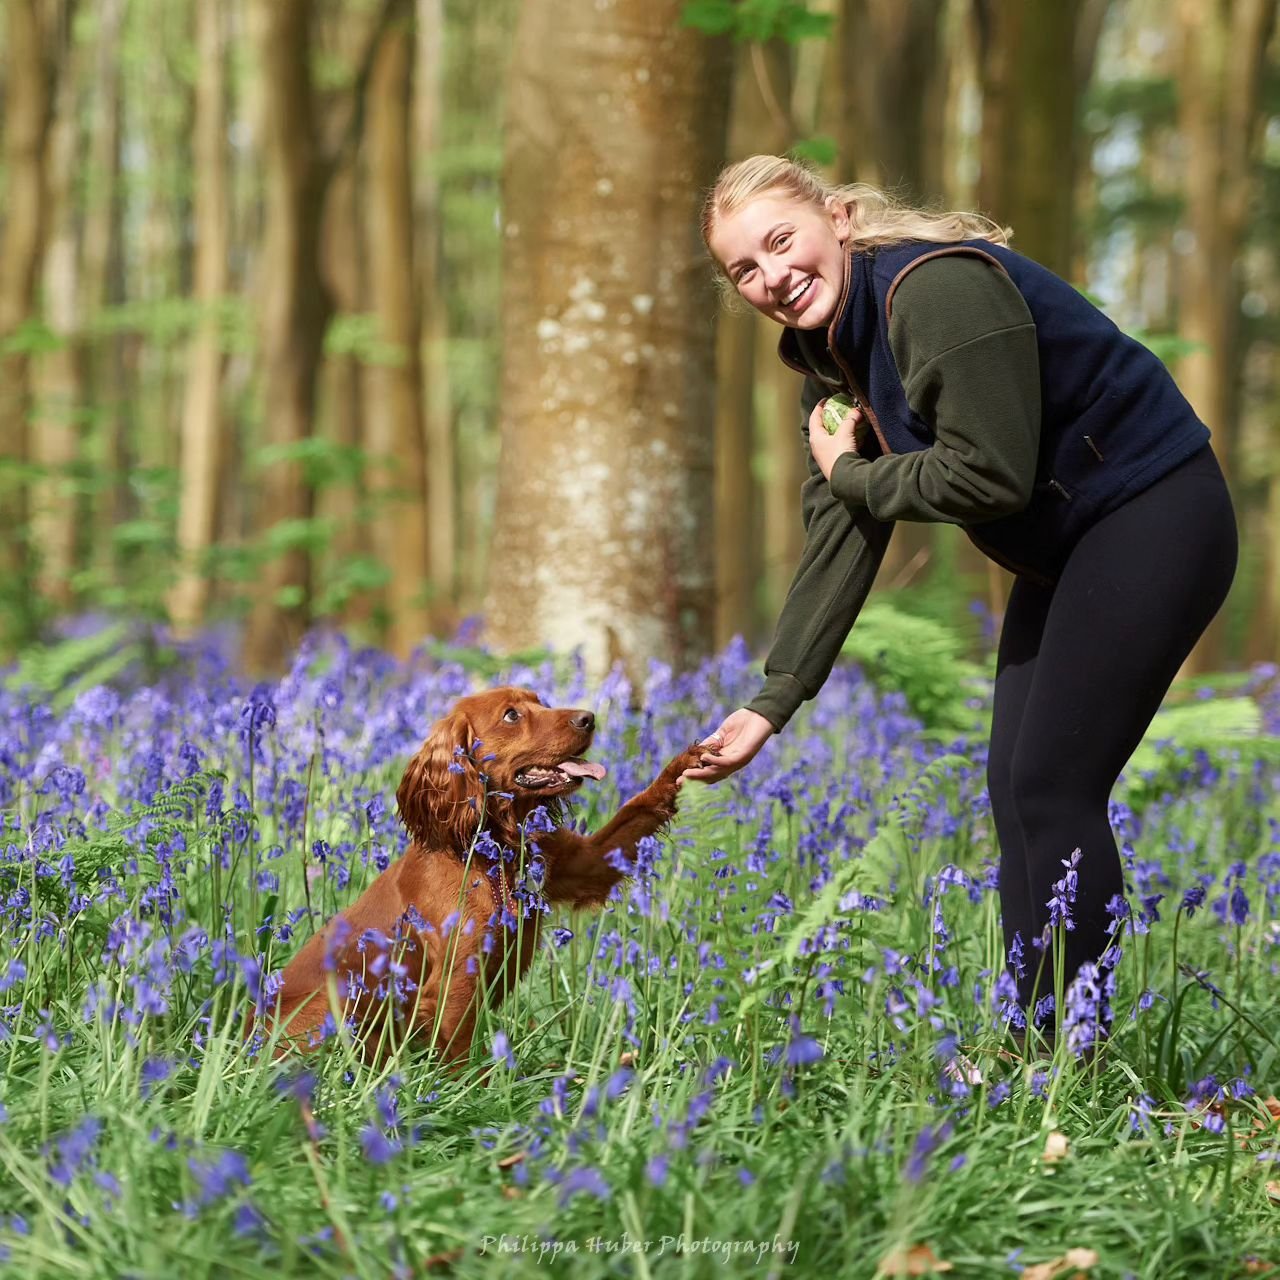 What a wonderful springtime photoshoot we had - the utterly captivating Hugo and his amazing owner Tilly, a professional Dog Walker based in Westbury, Wiltshire 🐾🤍🐾

#petportraitsbyphilippa 
#petportraitphotography 
#petphotographyuk
#wiltshirepho